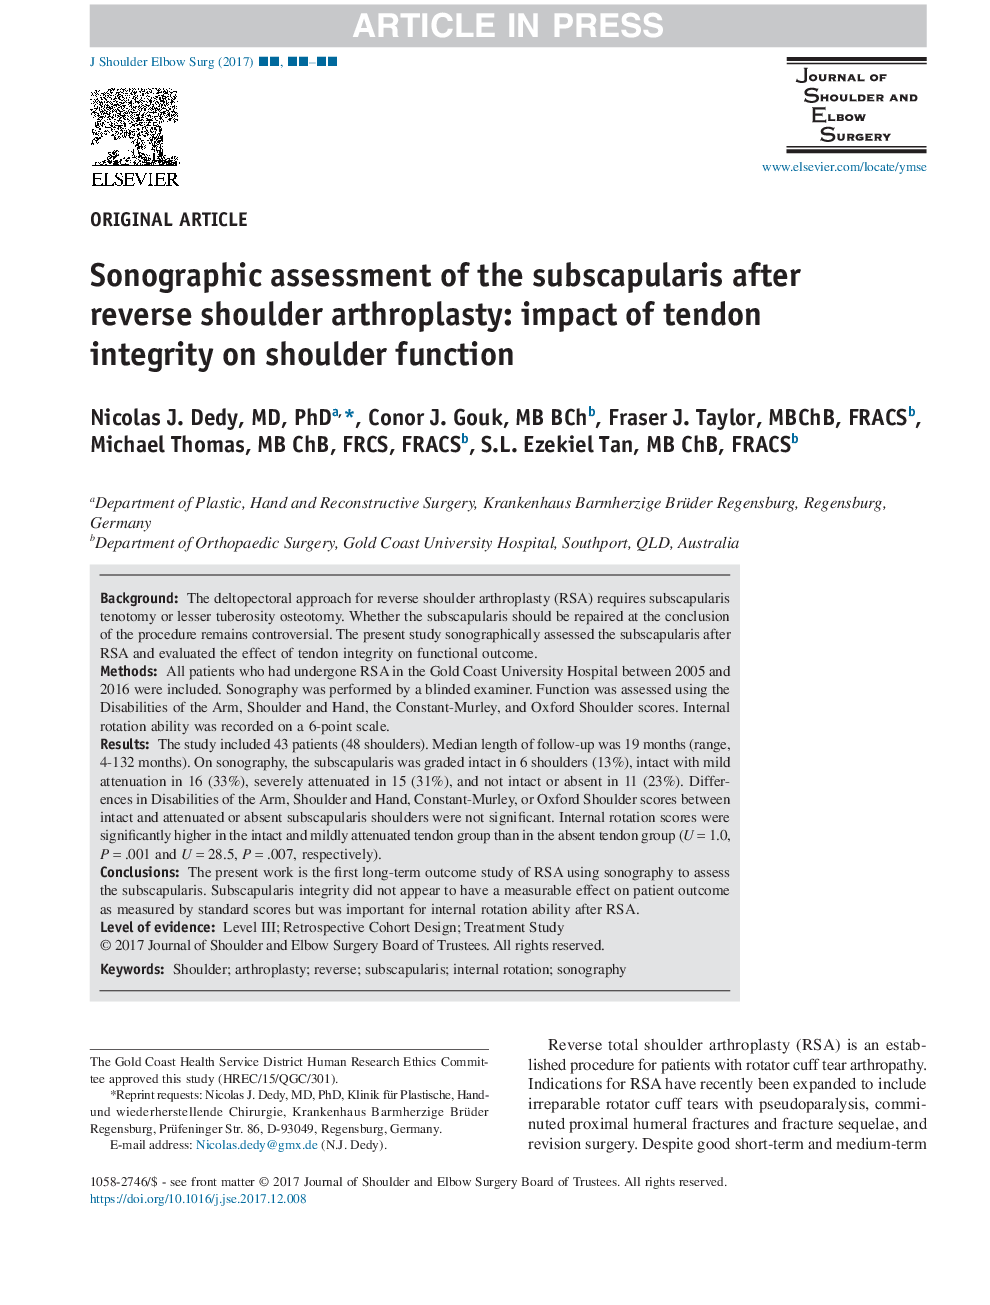 Sonographic assessment of the subscapularis after reverse shoulder arthroplasty: impact of tendon integrity on shoulder function